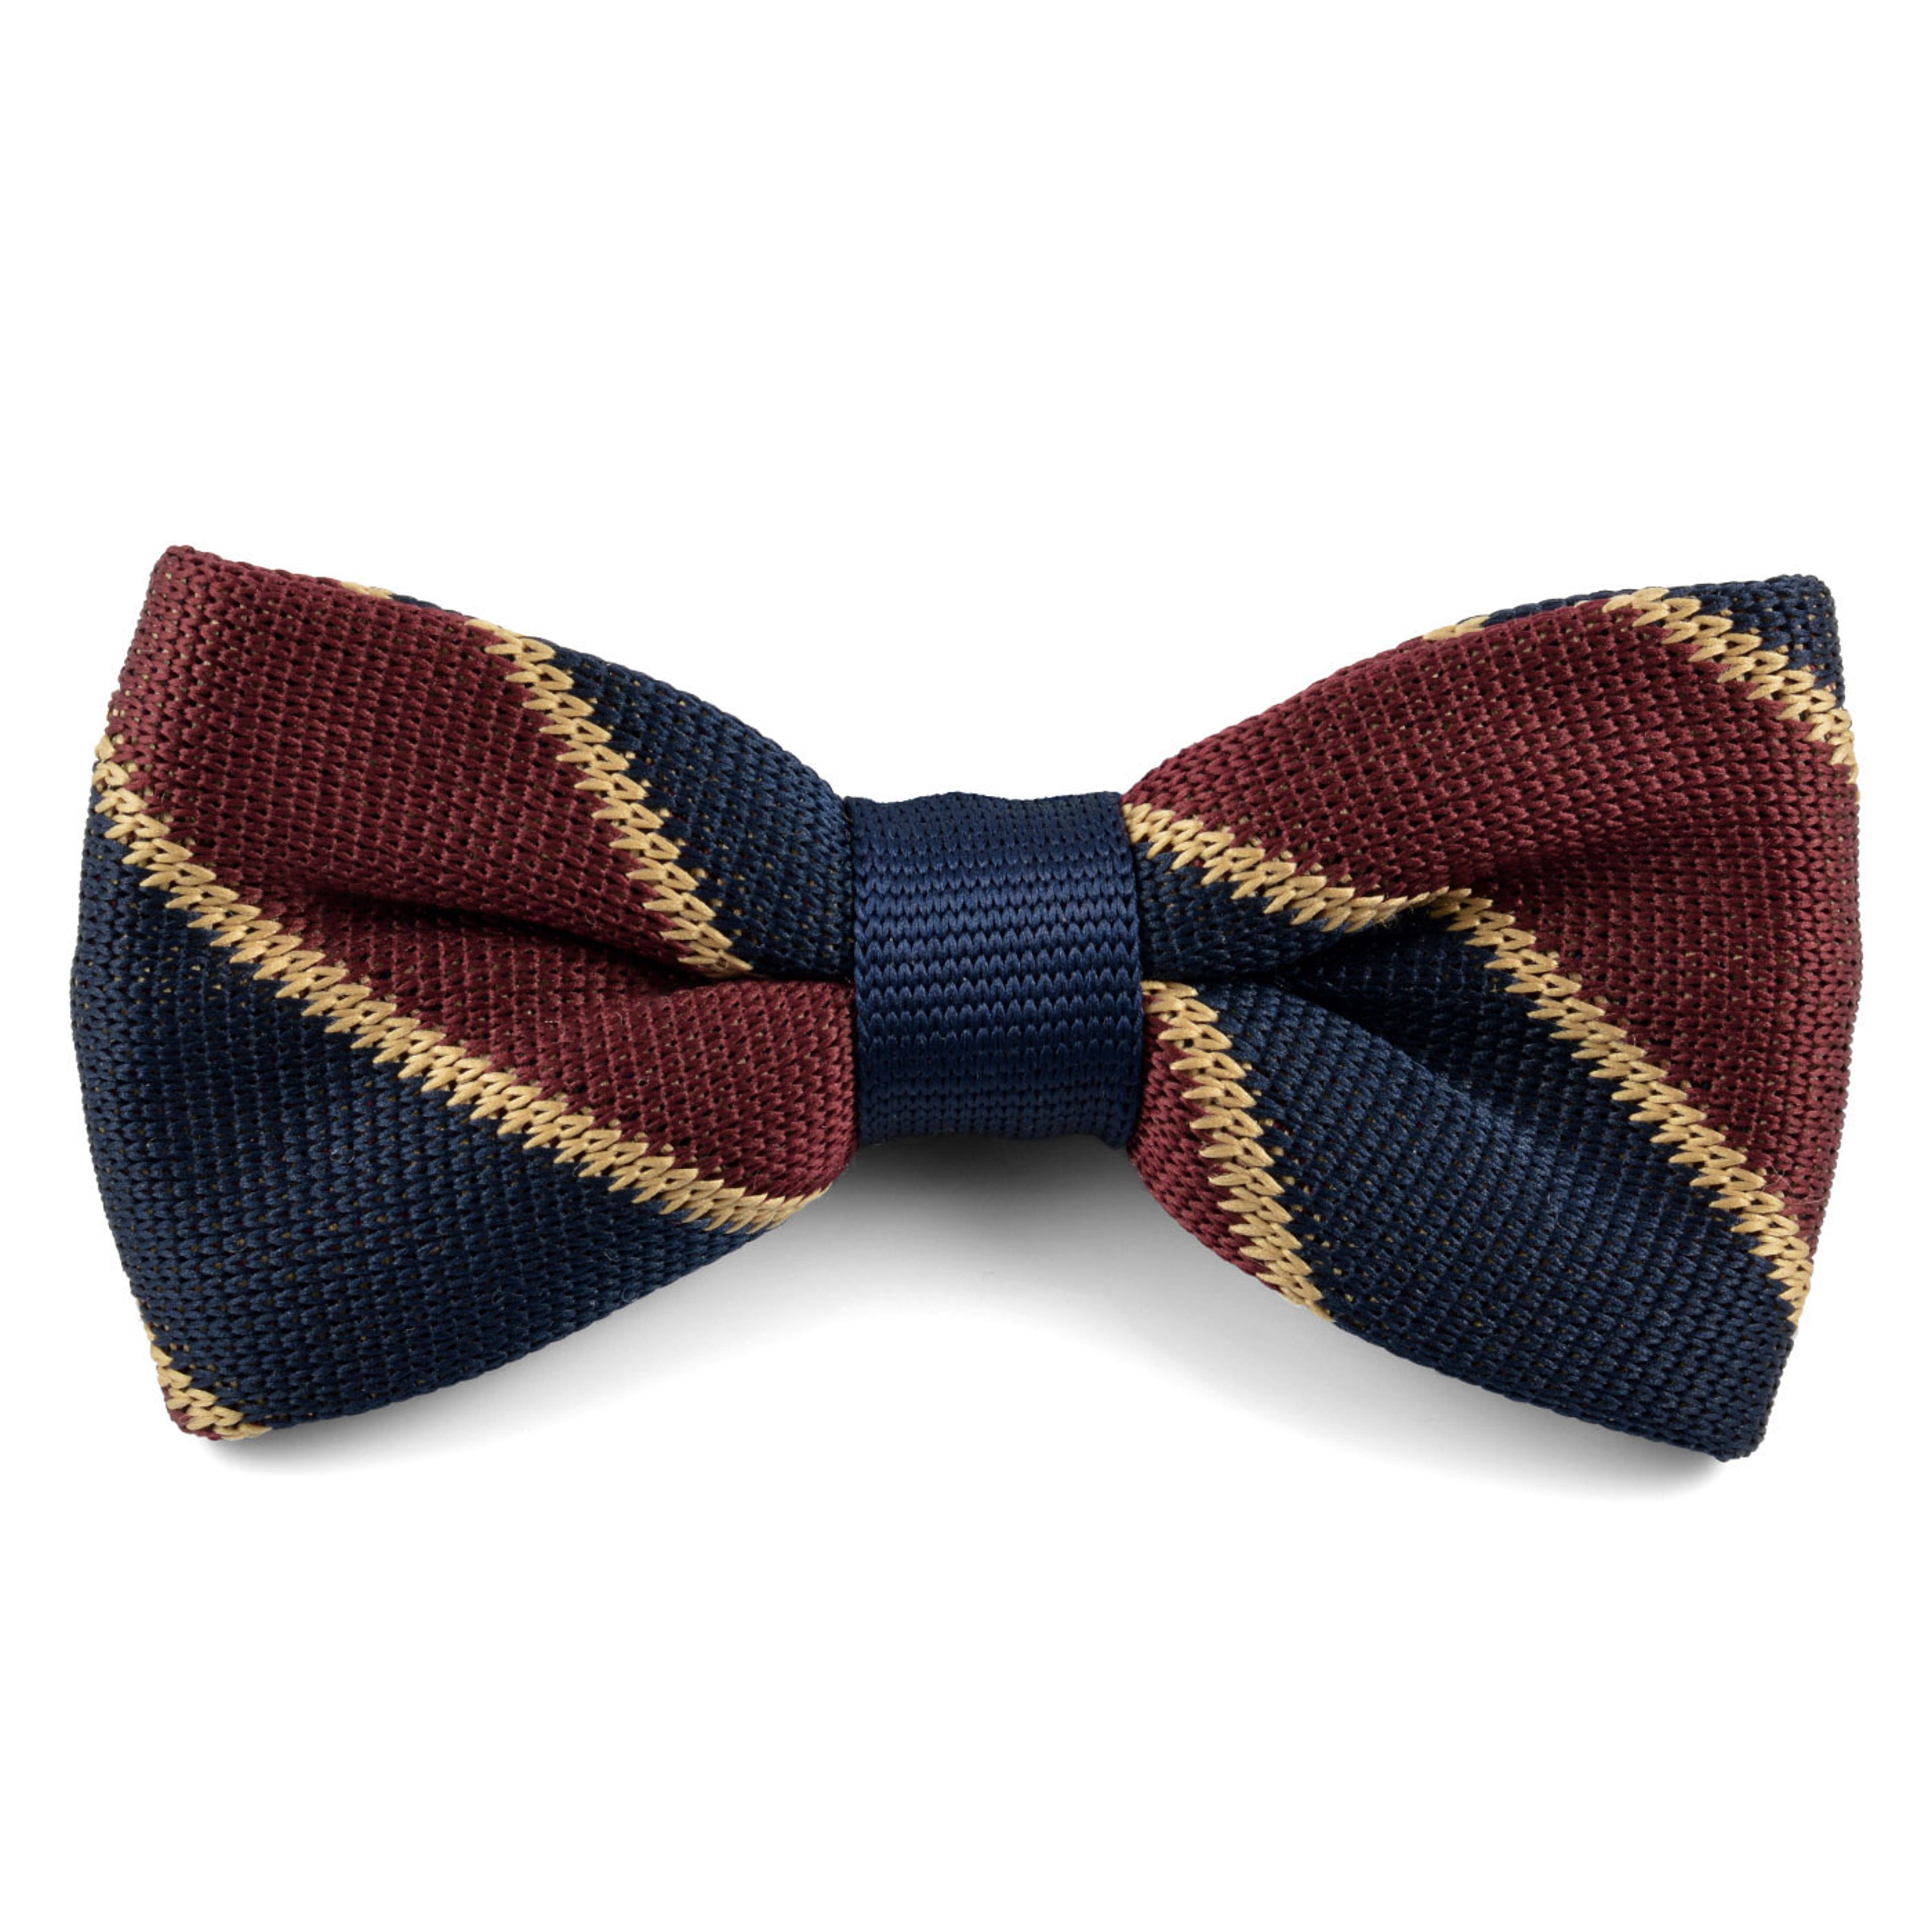 Royal Blue, Burgundy & Caramel Brown Striped Knitted Cotton Pre-Tied Bow Tie